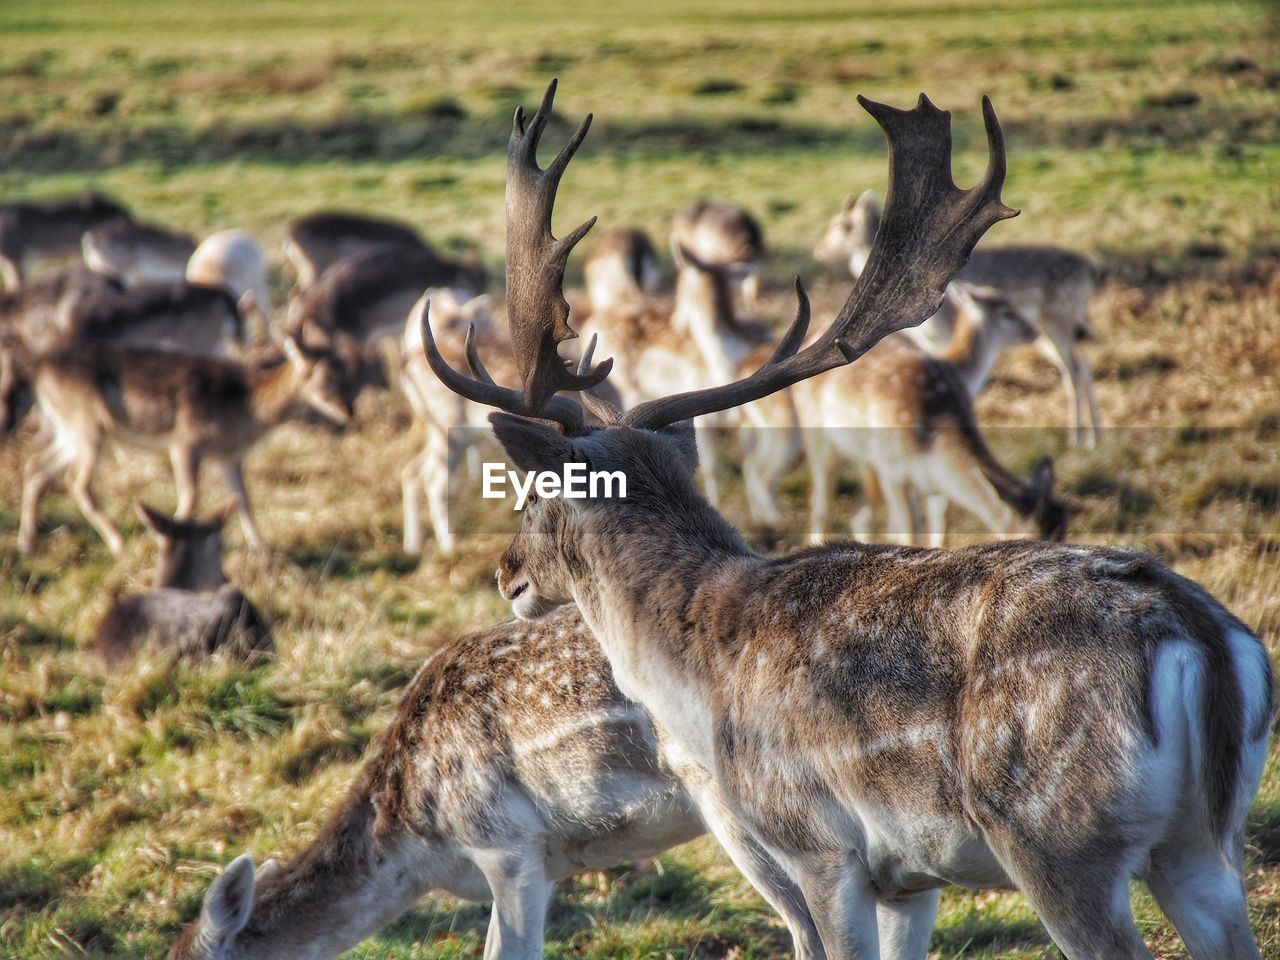 animal, animal themes, animal wildlife, wildlife, mammal, group of animals, deer, grass, field, nature, no people, herd, domestic animals, antler, day, plant, land, outdoors, plain, focus on foreground, herbivorous, environment, horned, reindeer, safari, large group of animals, tourism, standing, stag, beauty in nature